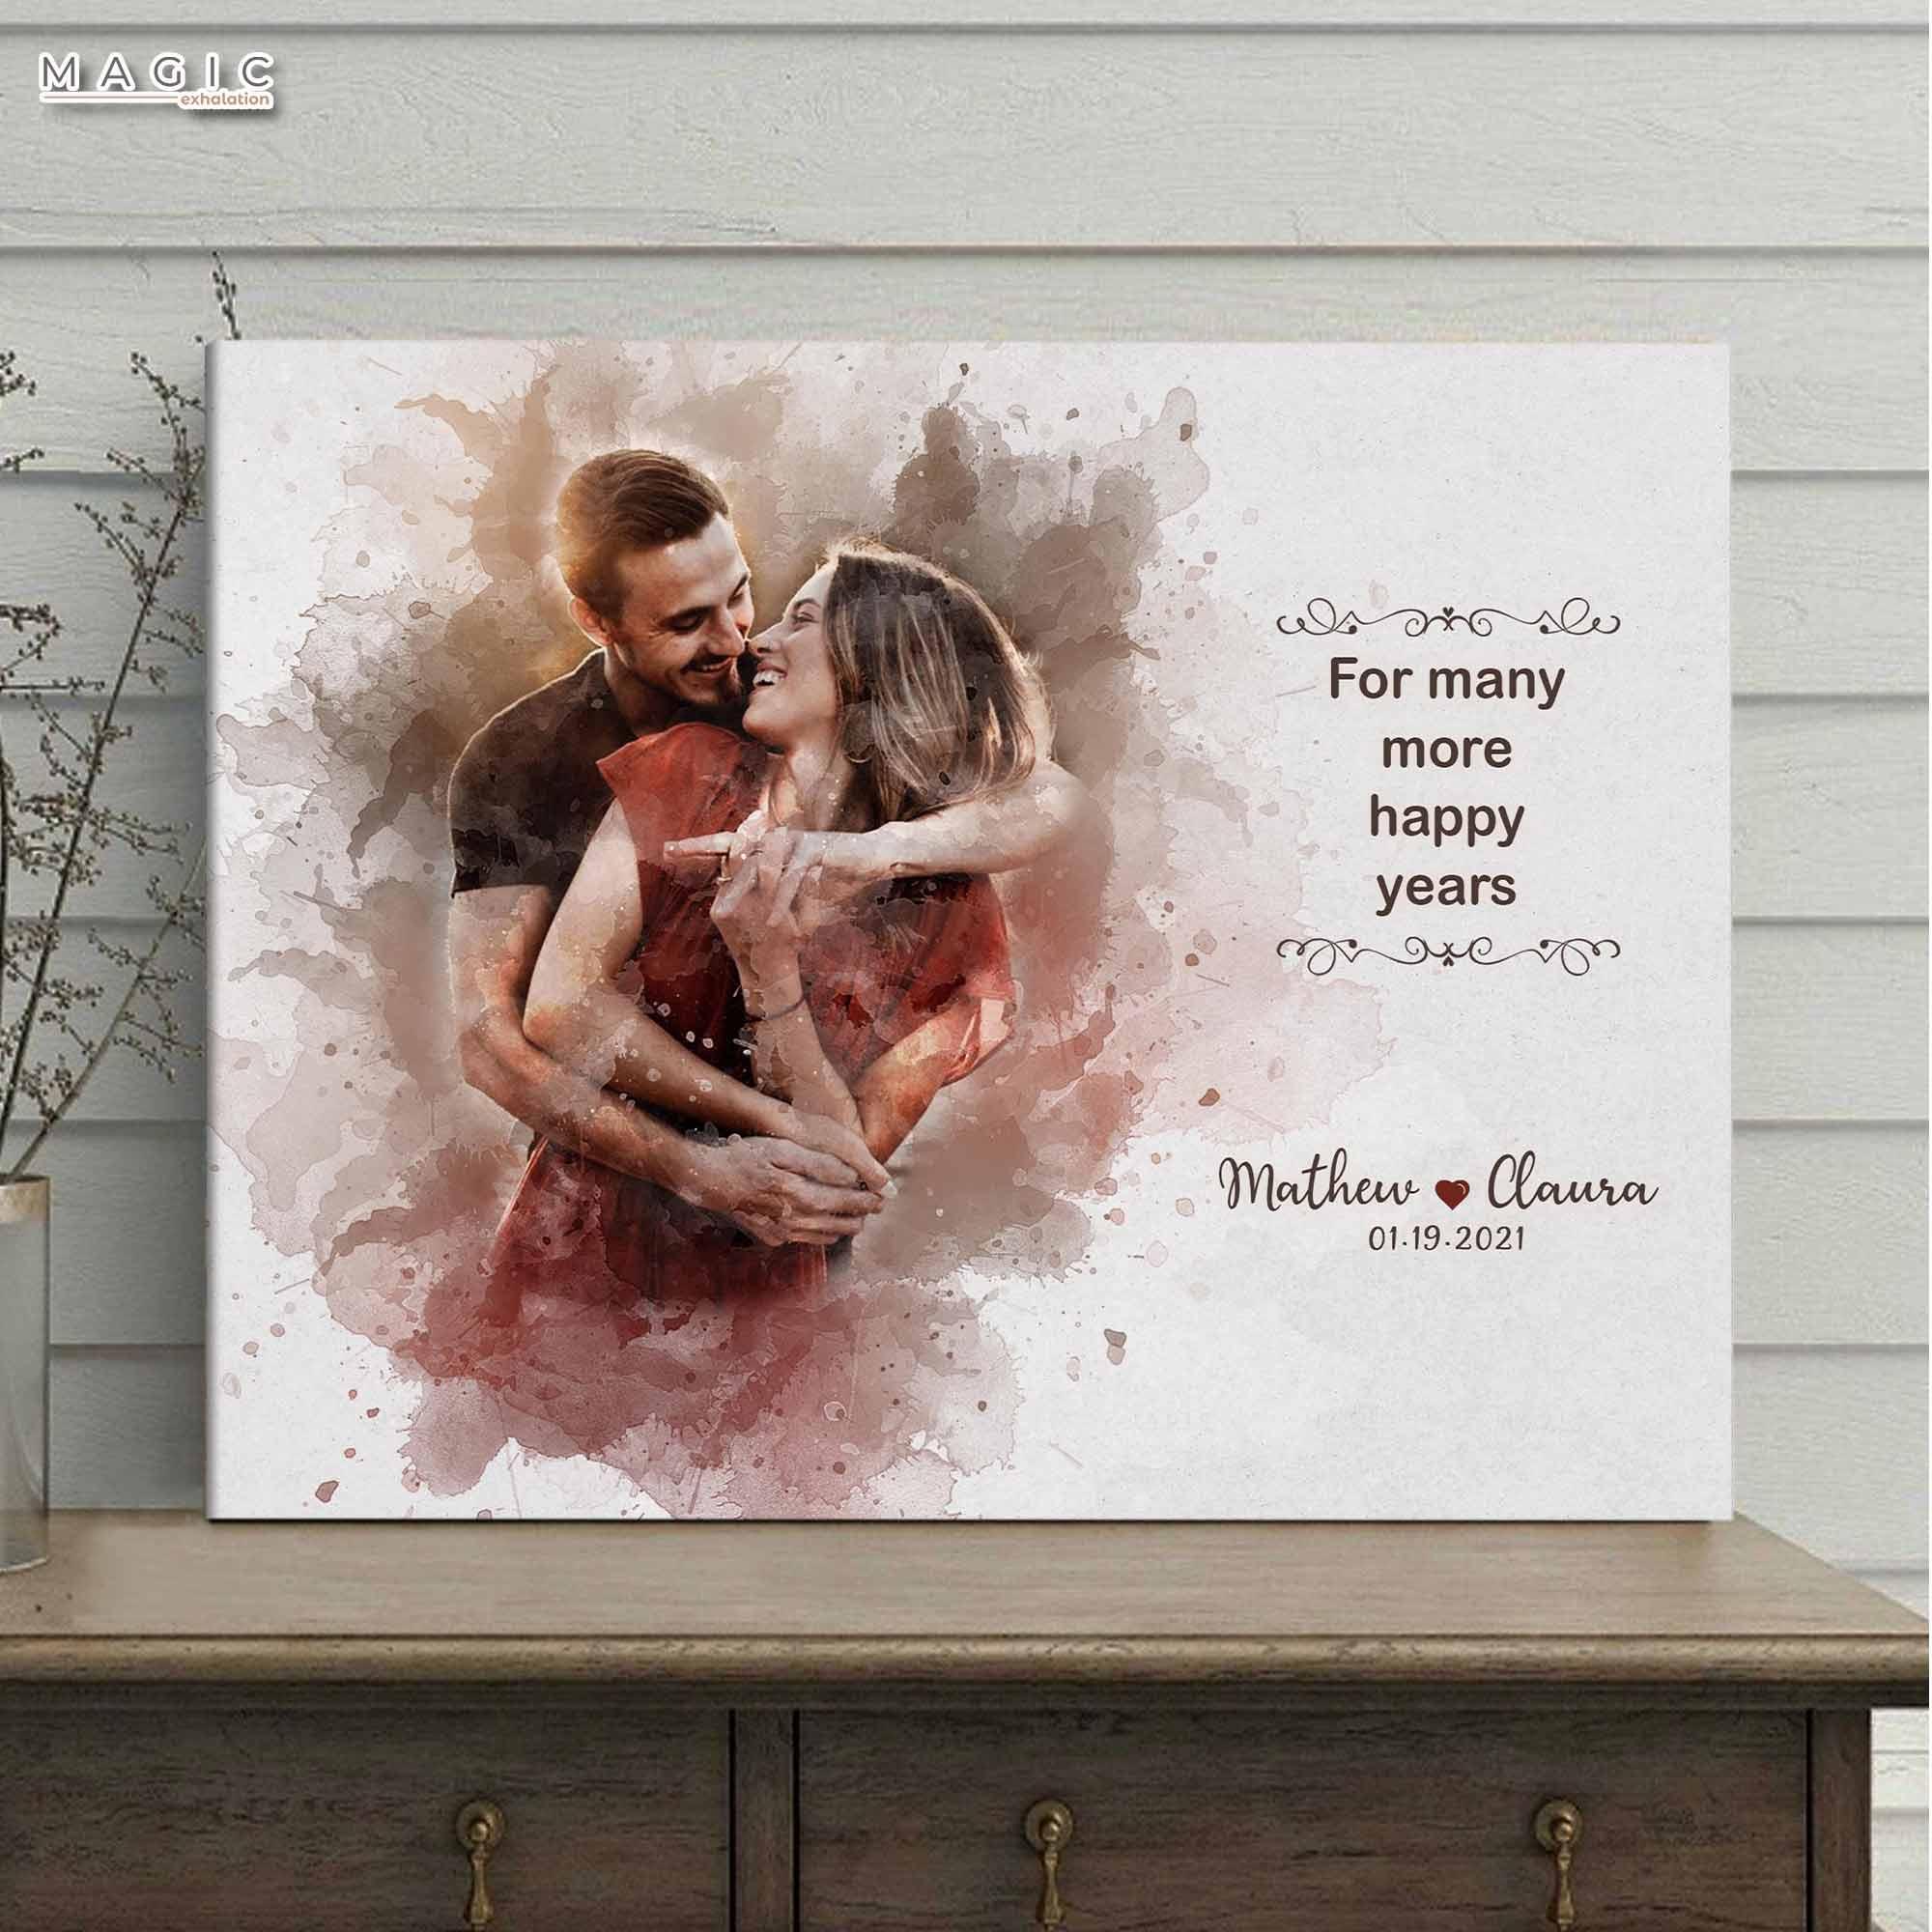 Personalized Valentine Gifts for Him, 5 Year Anniversary Gifts for Her,  Vinyl Record Canvas Wall Art - Magic Exhalation